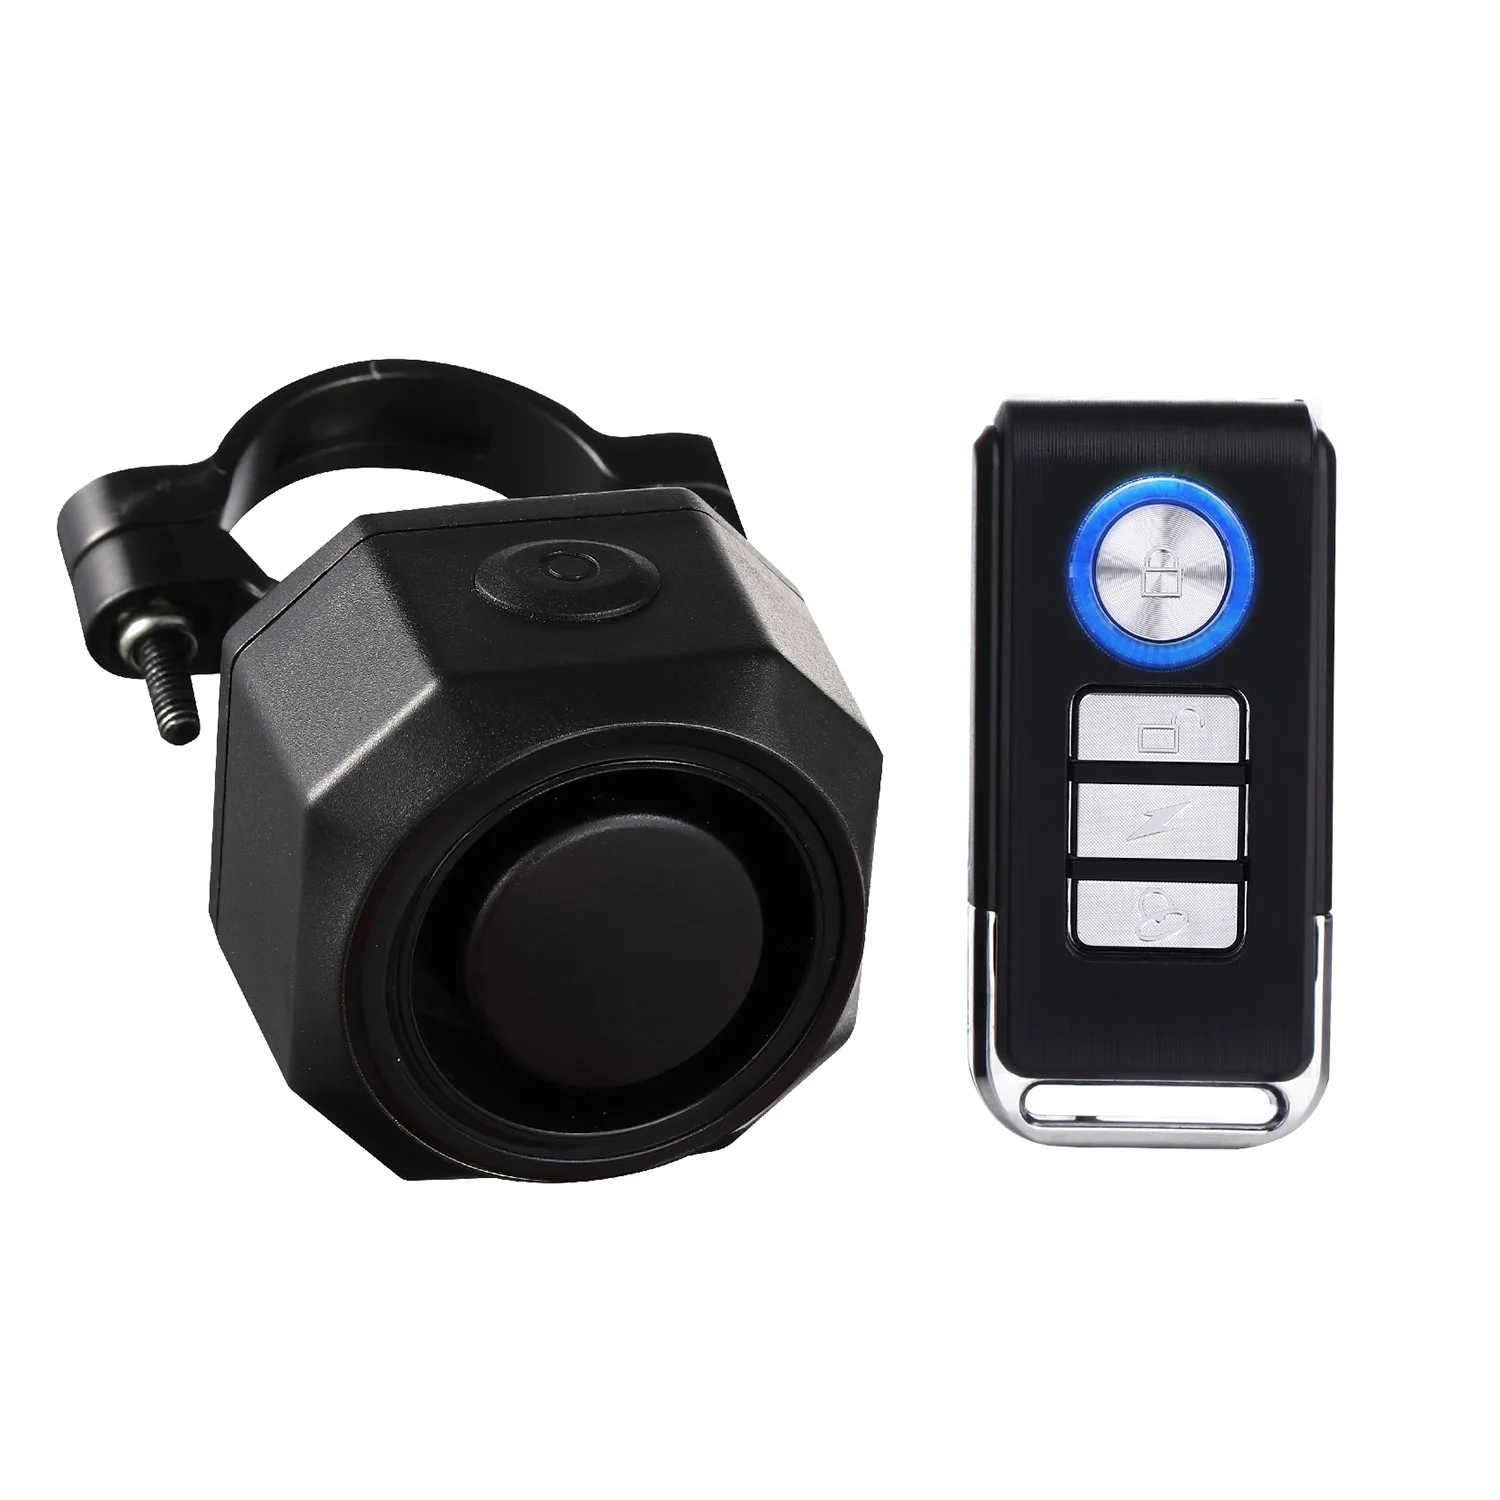 

USB Rechargeable Bike Alarm with Remote 110dB Loud Volume Adjustable Wireless Vehicle Security Alarm System Anti Theft Vibration